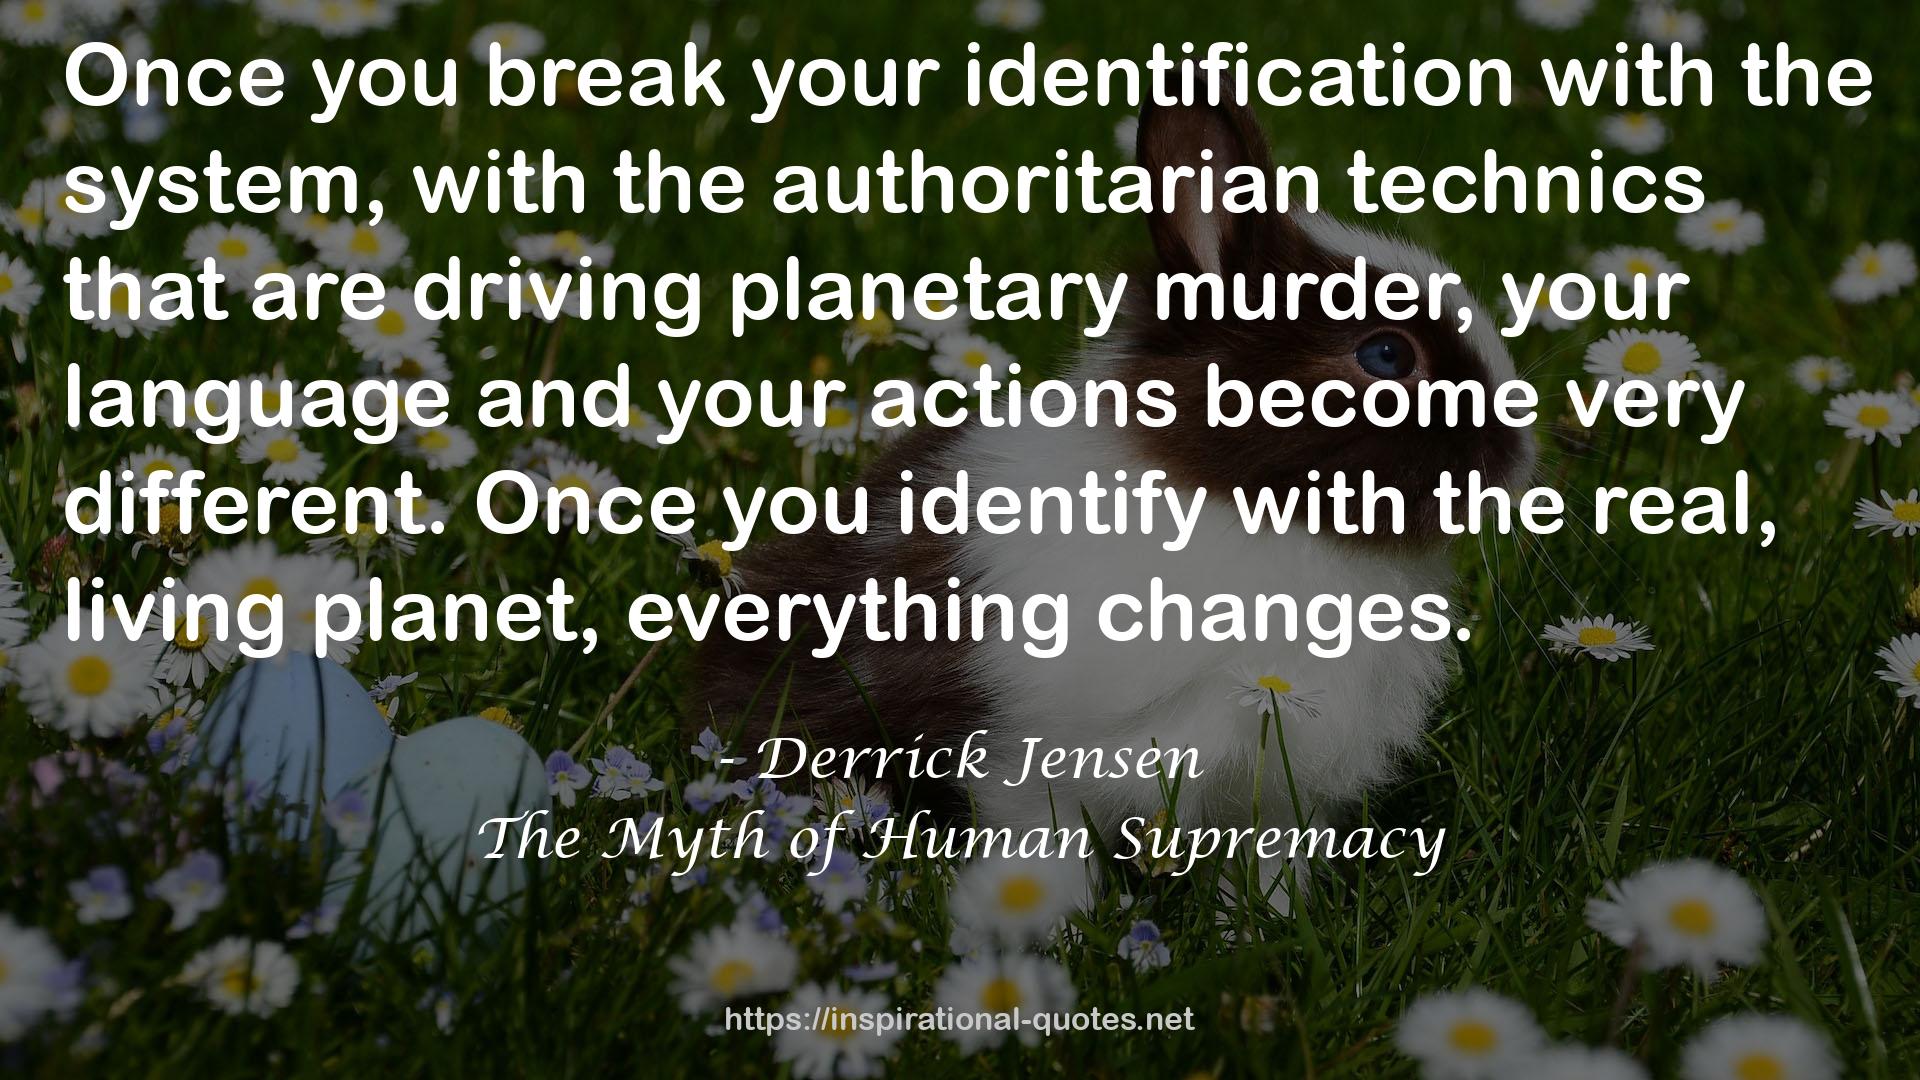 The Myth of Human Supremacy QUOTES